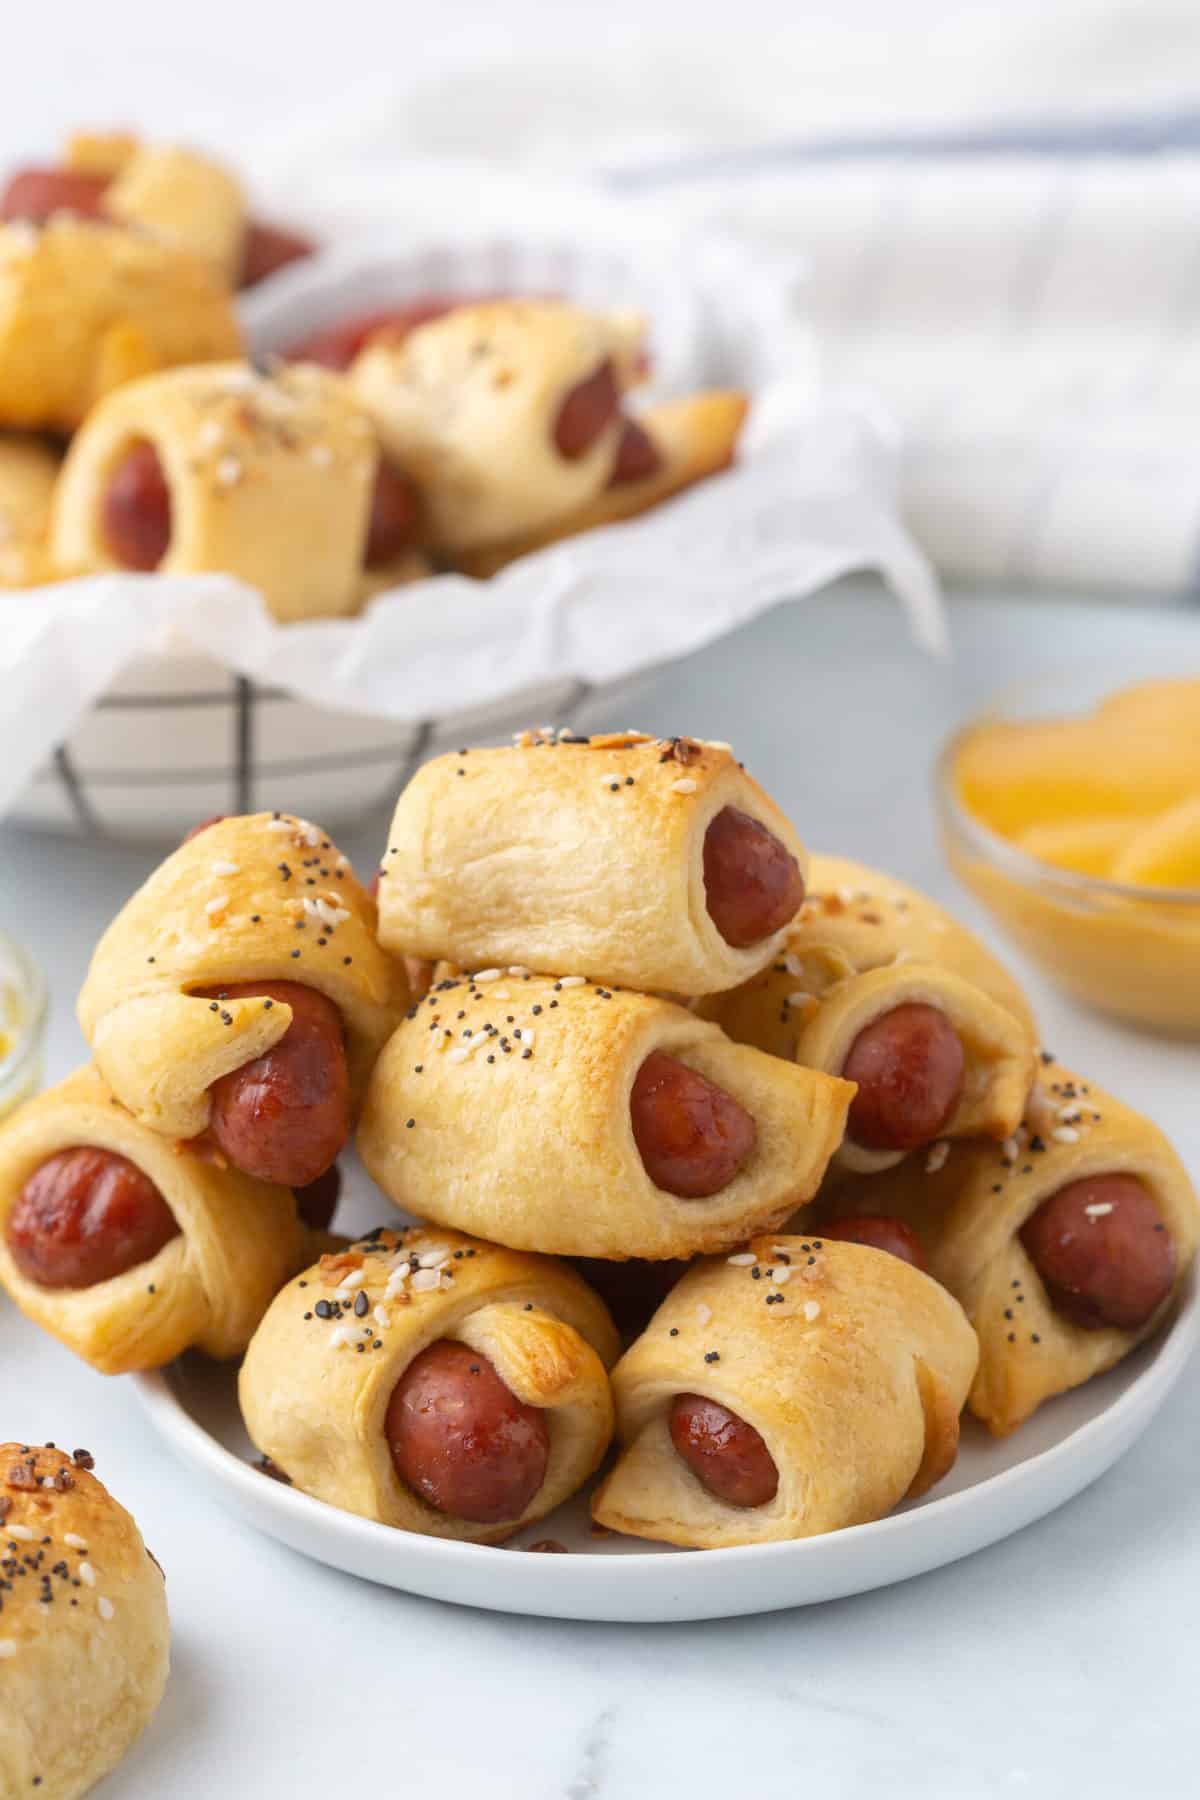 a bunch of baked pigs in a blanket served on a plate